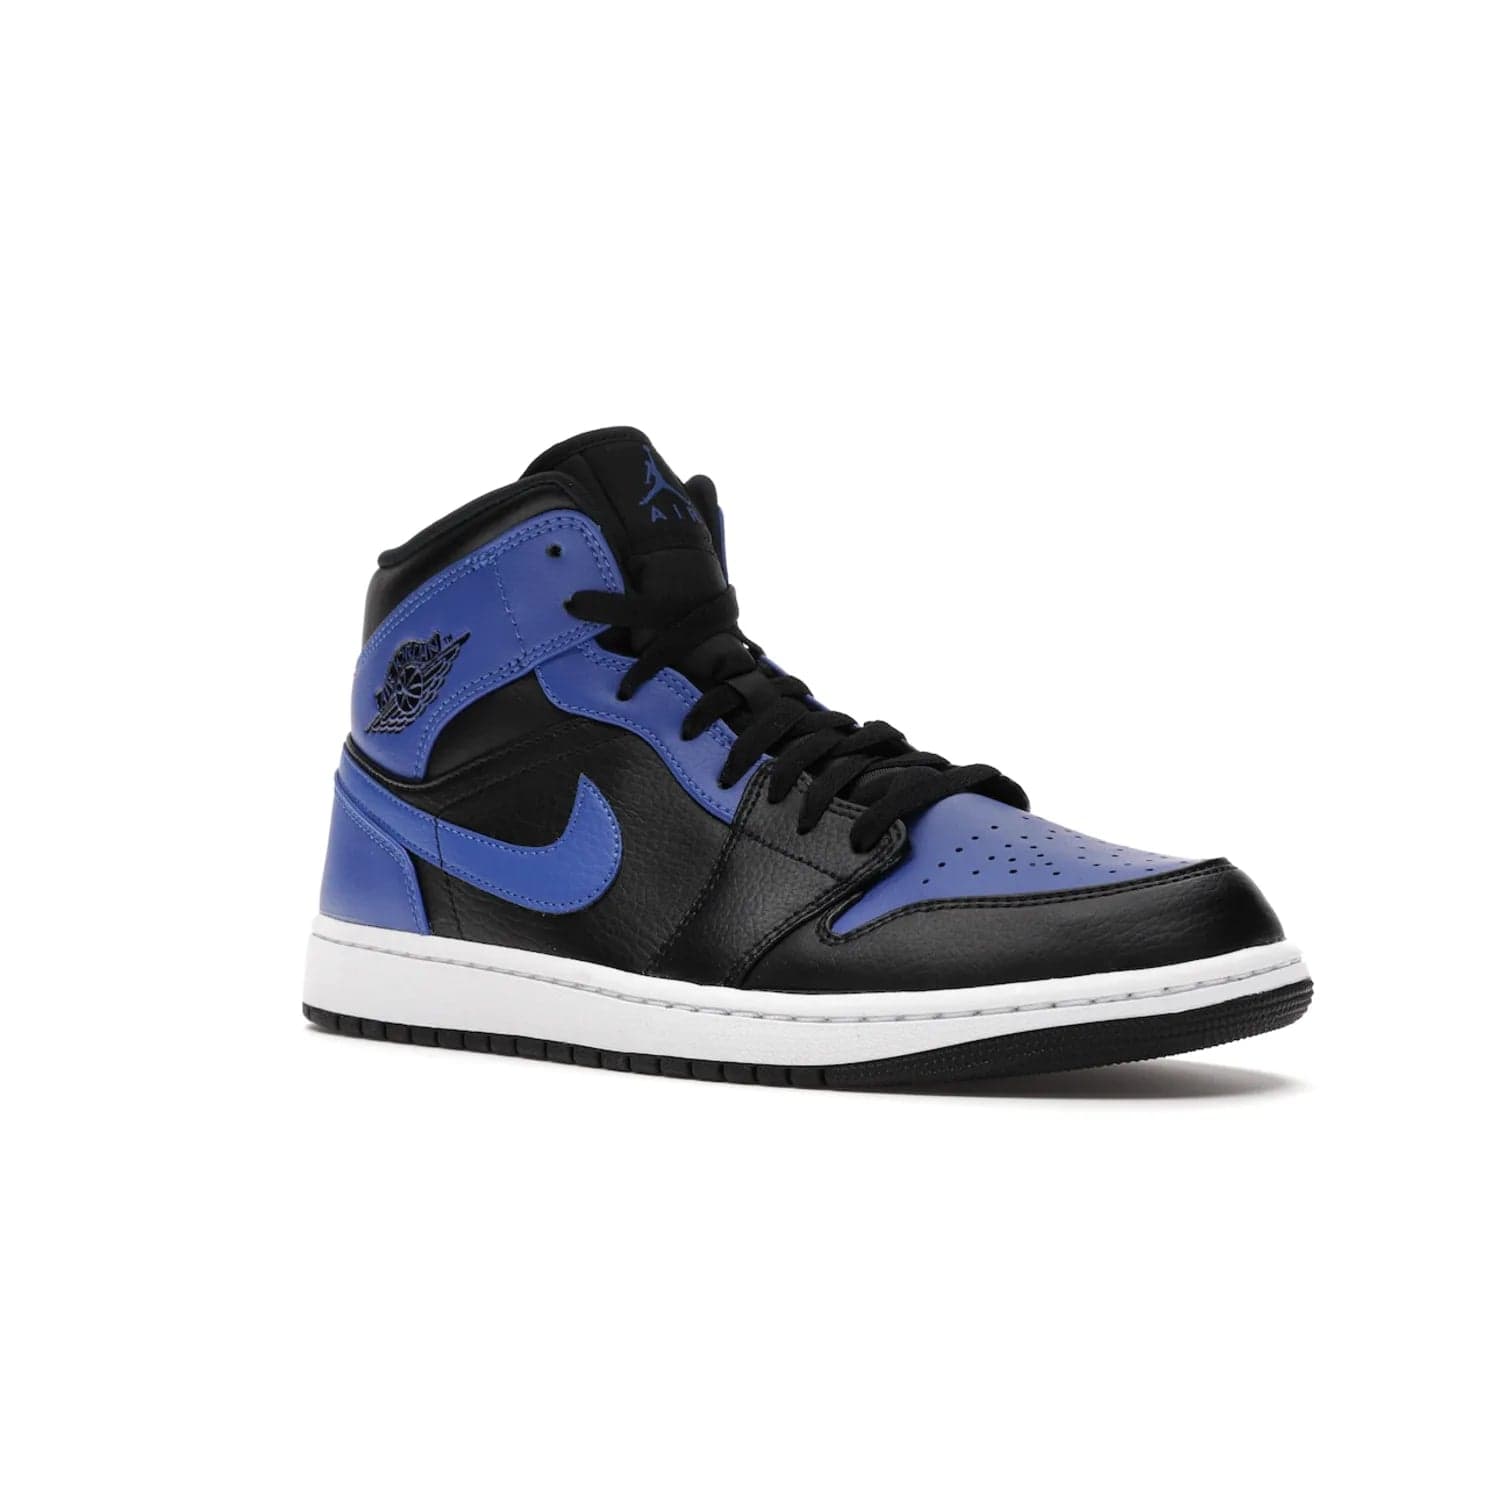 Jordan 1 Mid Hyper Royal Tumbled Leather - Image 5 - Only at www.BallersClubKickz.com - Iconic colorway of the Air Jordan 1 Mid Black Royal Tumbled Leather. Features a black tumbled leather upper, royal blue leather overlays, white midsole & black rubber outsole. Released December 2020. Adds premium style to any collection.